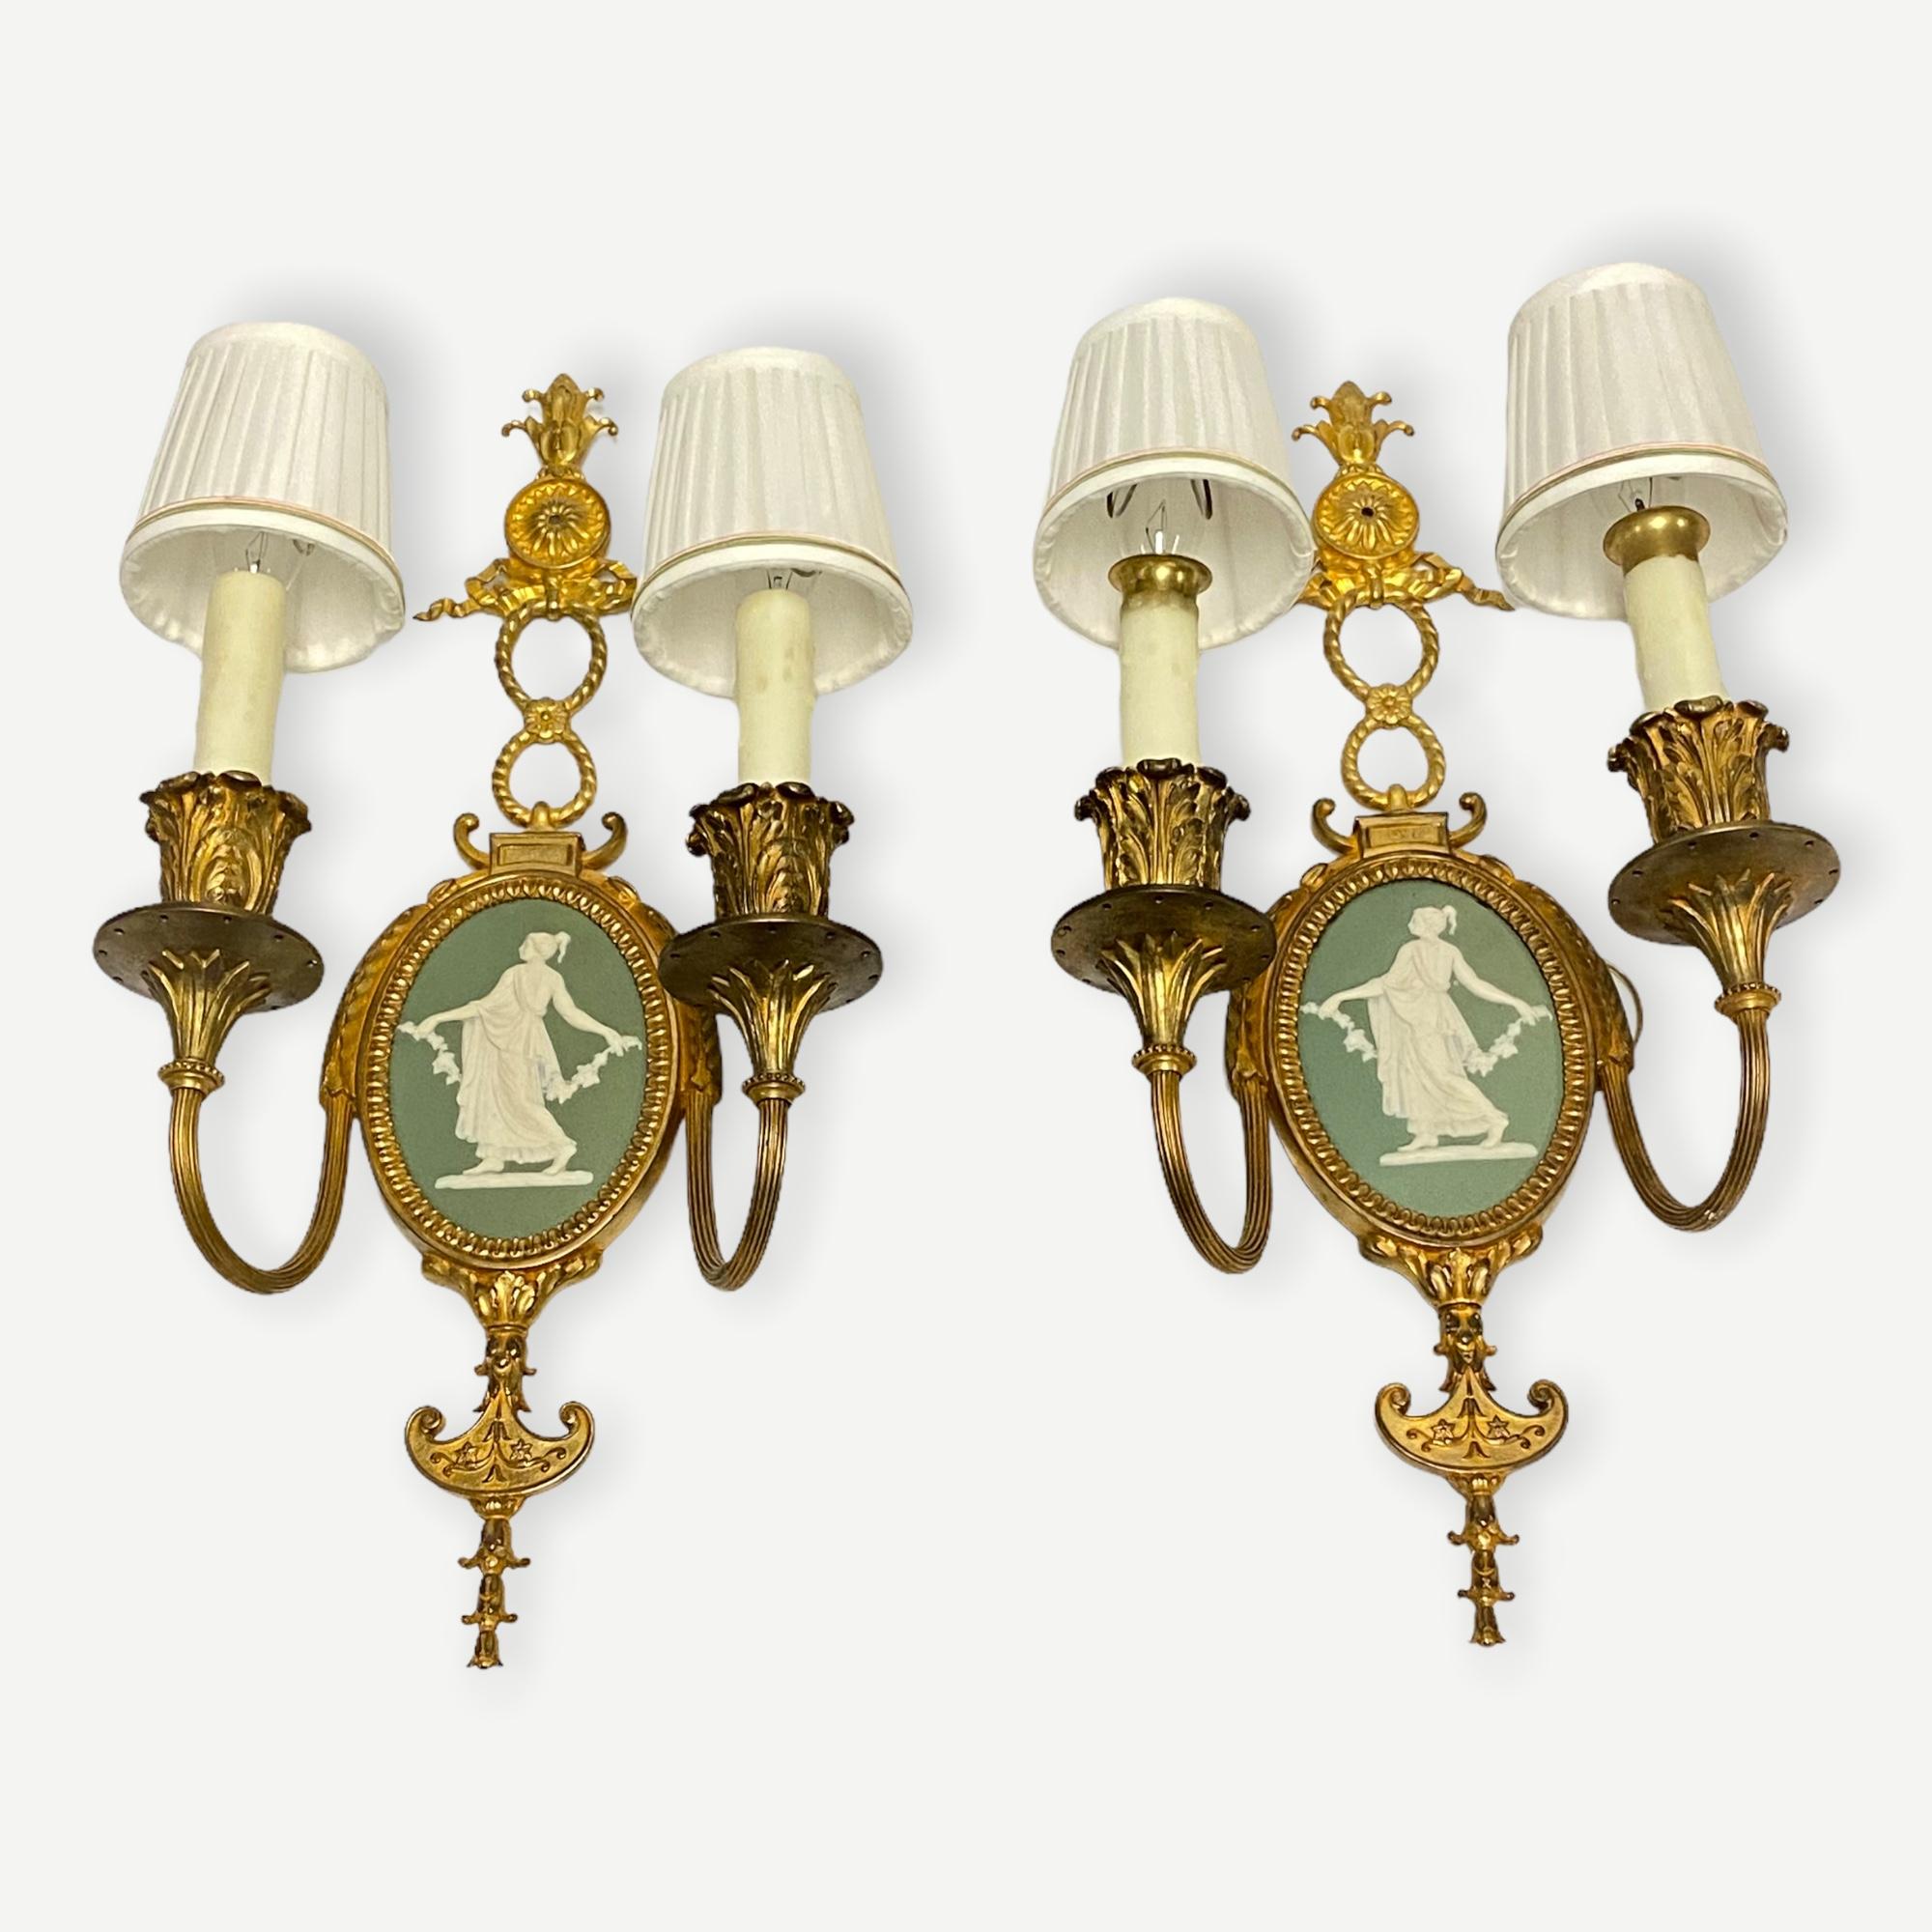 Louis XVI style gilt bronze sconces with neoclassical jasperware plaques by Wedgwood.